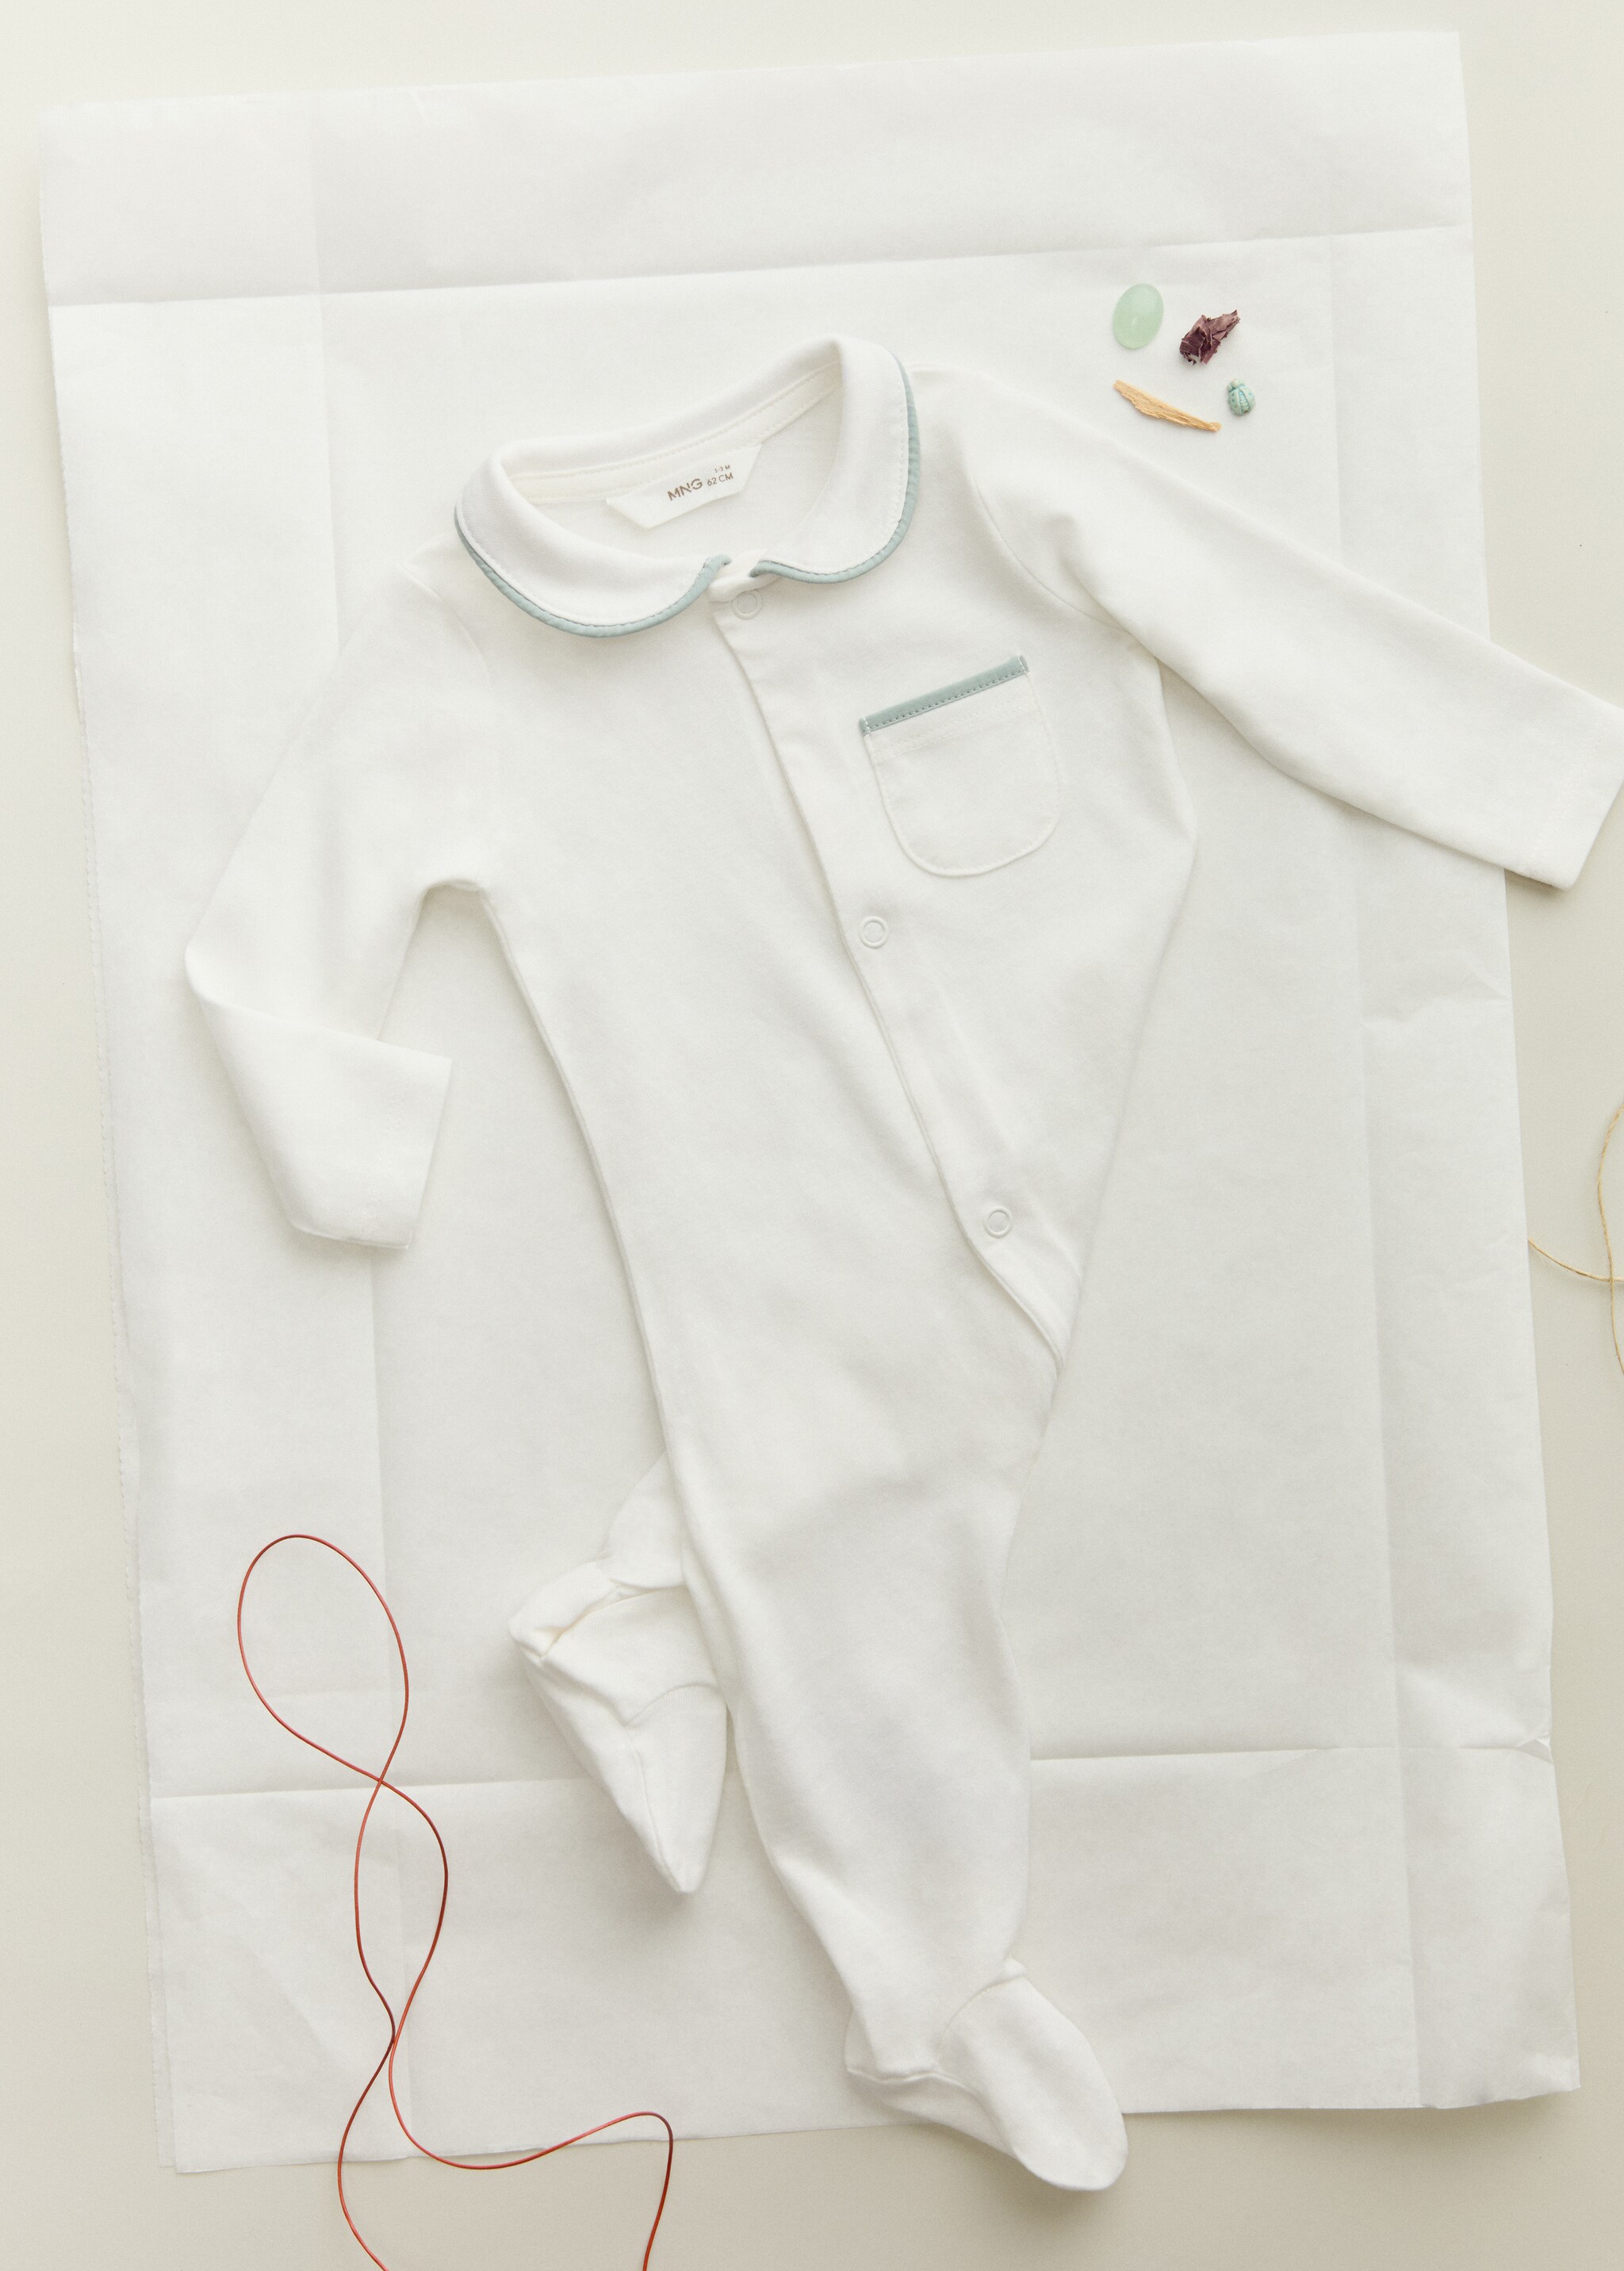 Cotton body pyjamas - Details of the article 5